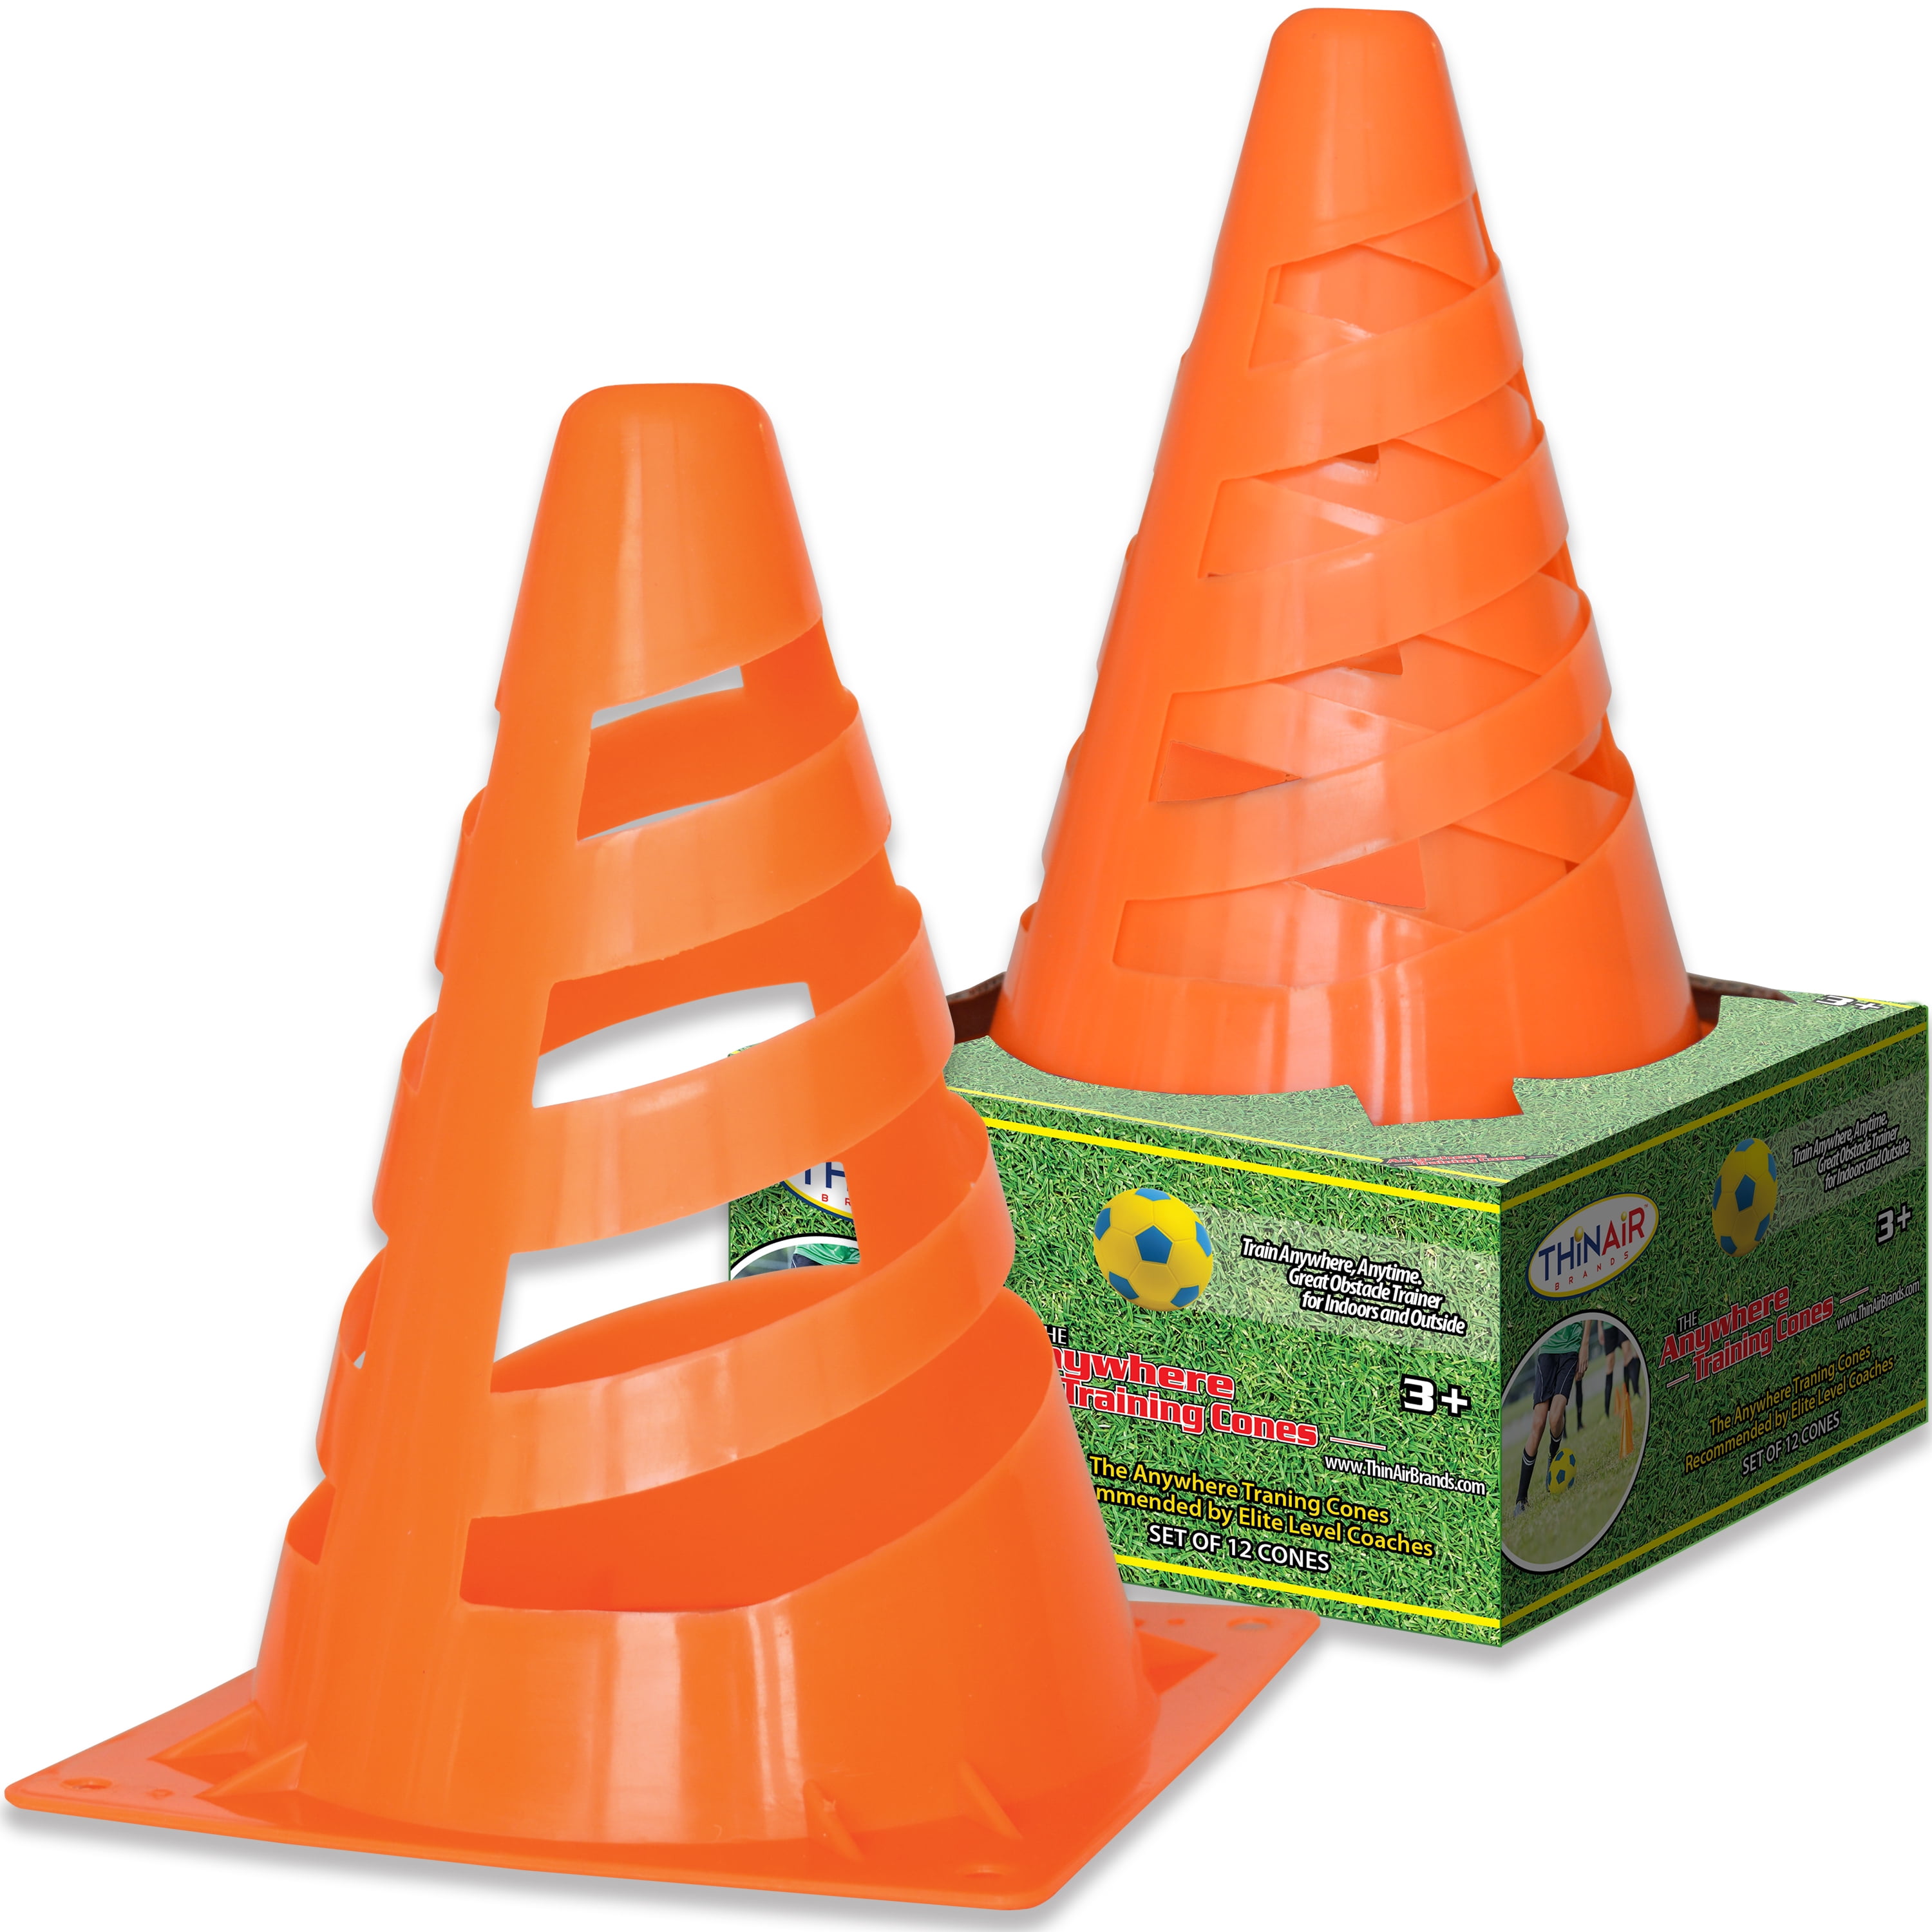 3.35 Inch Plastic Soccer Cones Agility Training Marker Cone for Kids Home Gym Football Training Soccer 5 Colors Color : Yellow MAGT Sport Training Traffic Cone 